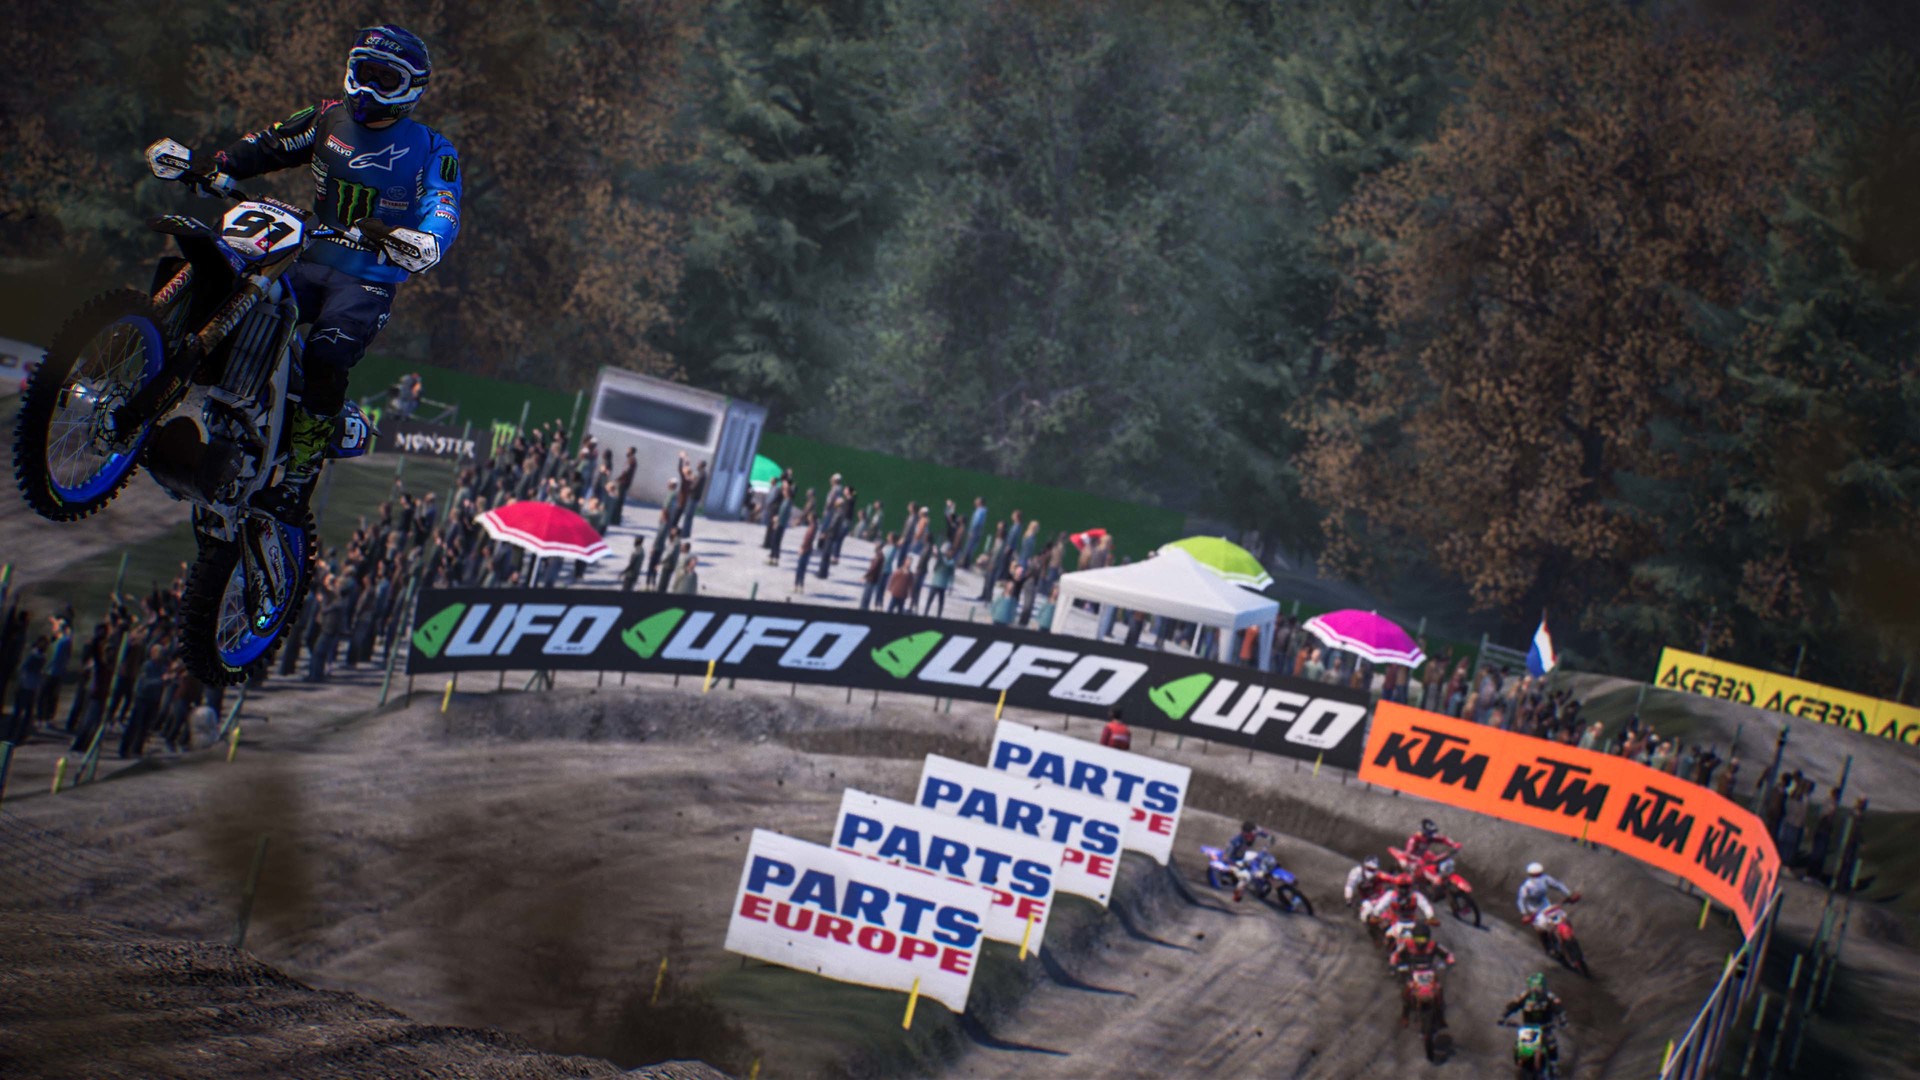 MXGP 2021 - The Official Motocross Videogame on Steam